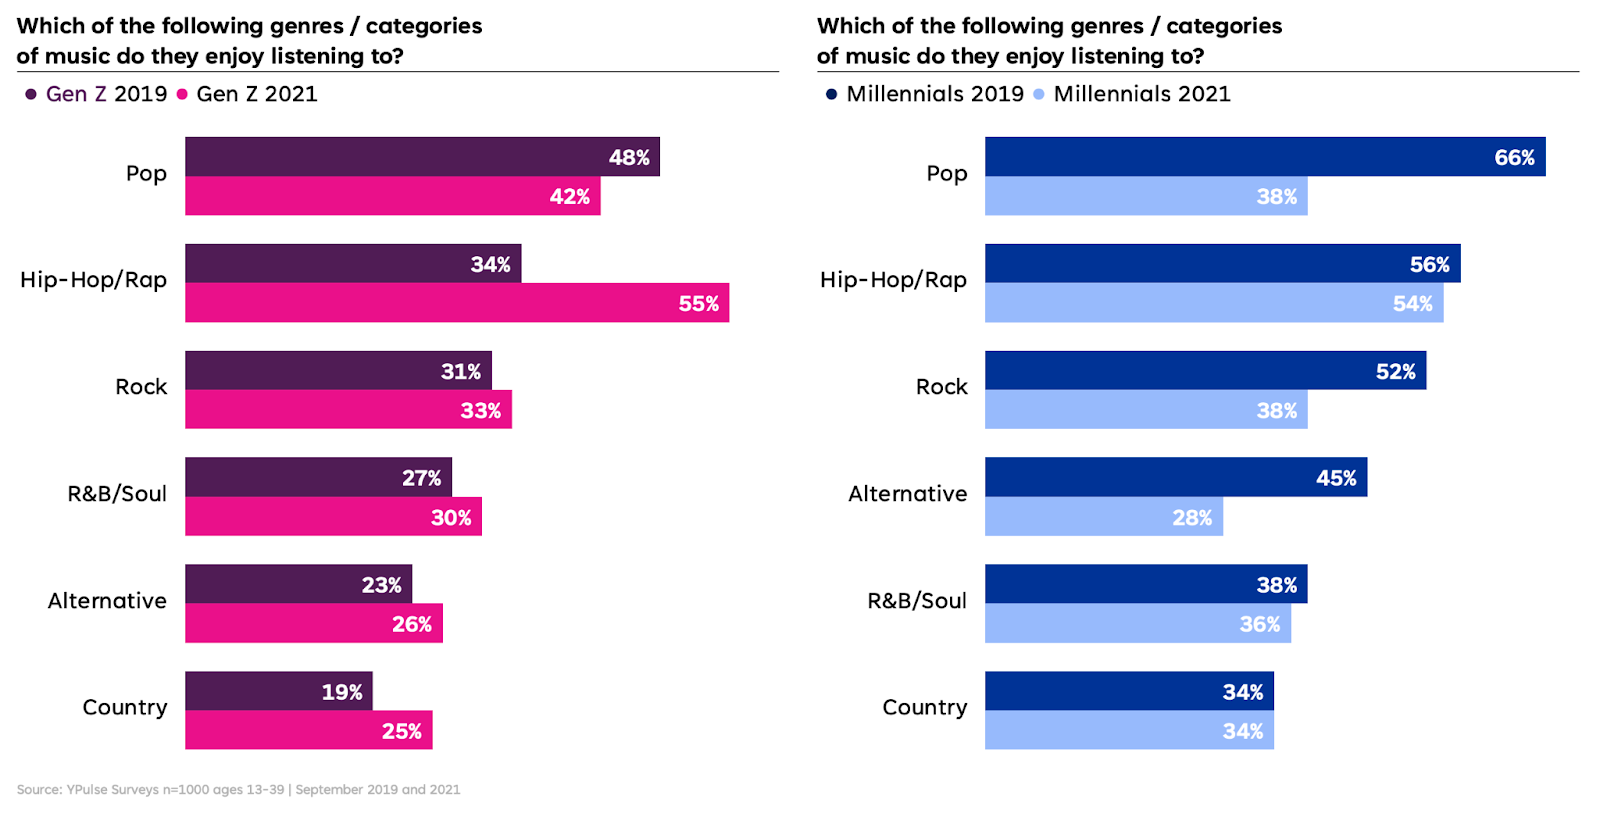 This is a graph showing which of the genres and categories of music do Gen Z and millennials listen to 